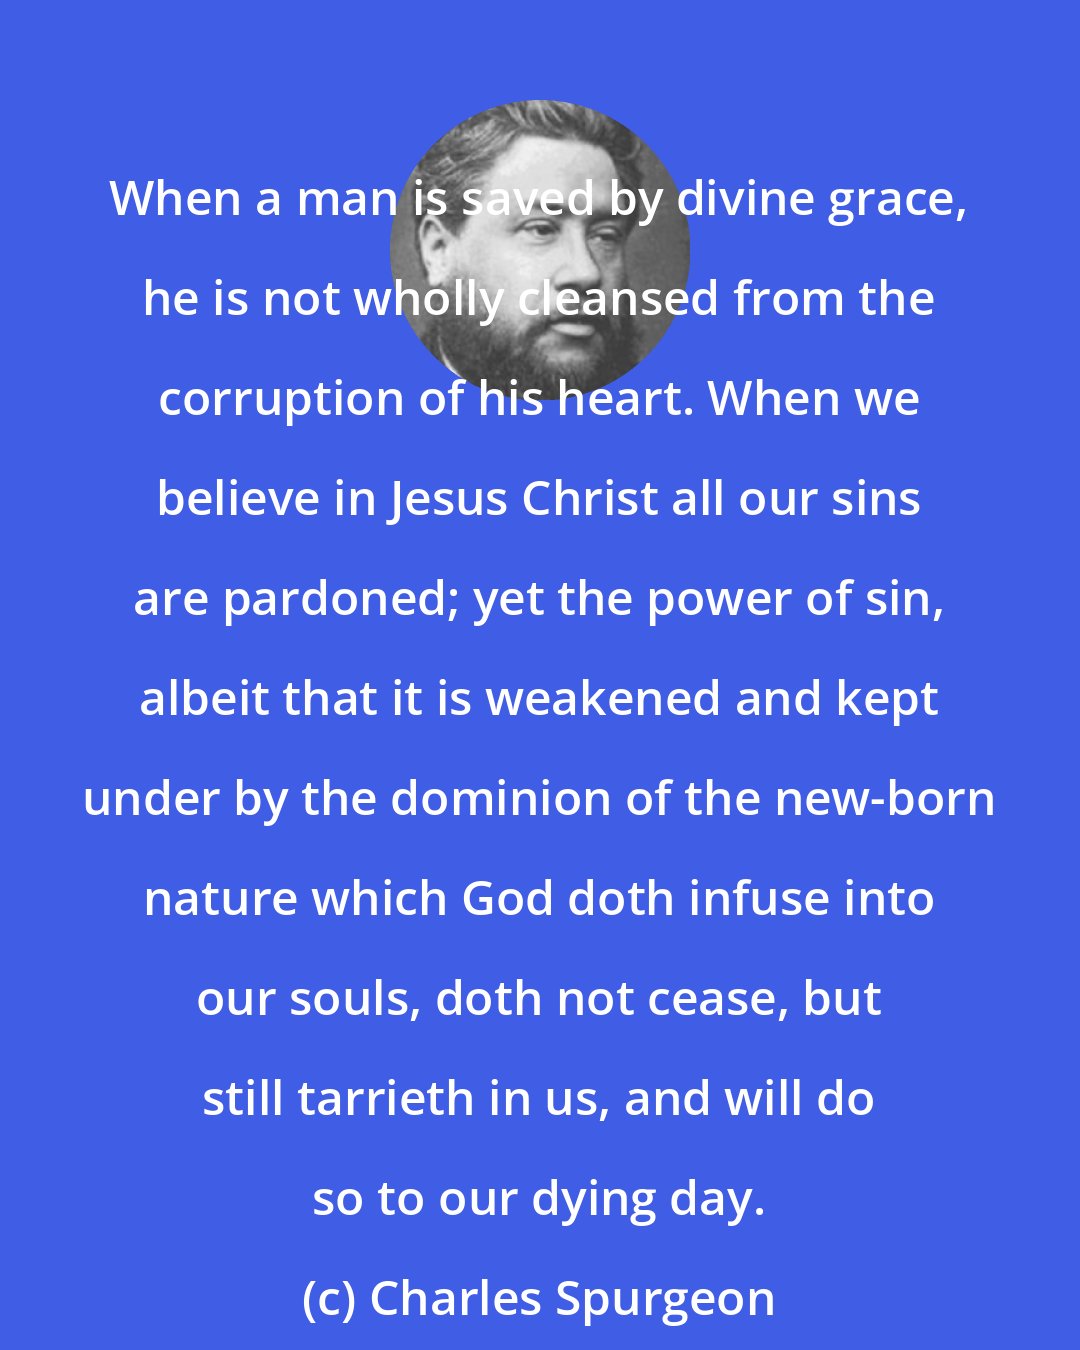 Charles Spurgeon: When a man is saved by divine grace, he is not wholly cleansed from the corruption of his heart. When we believe in Jesus Christ all our sins are pardoned; yet the power of sin, albeit that it is weakened and kept under by the dominion of the new-born nature which God doth infuse into our souls, doth not cease, but still tarrieth in us, and will do so to our dying day.